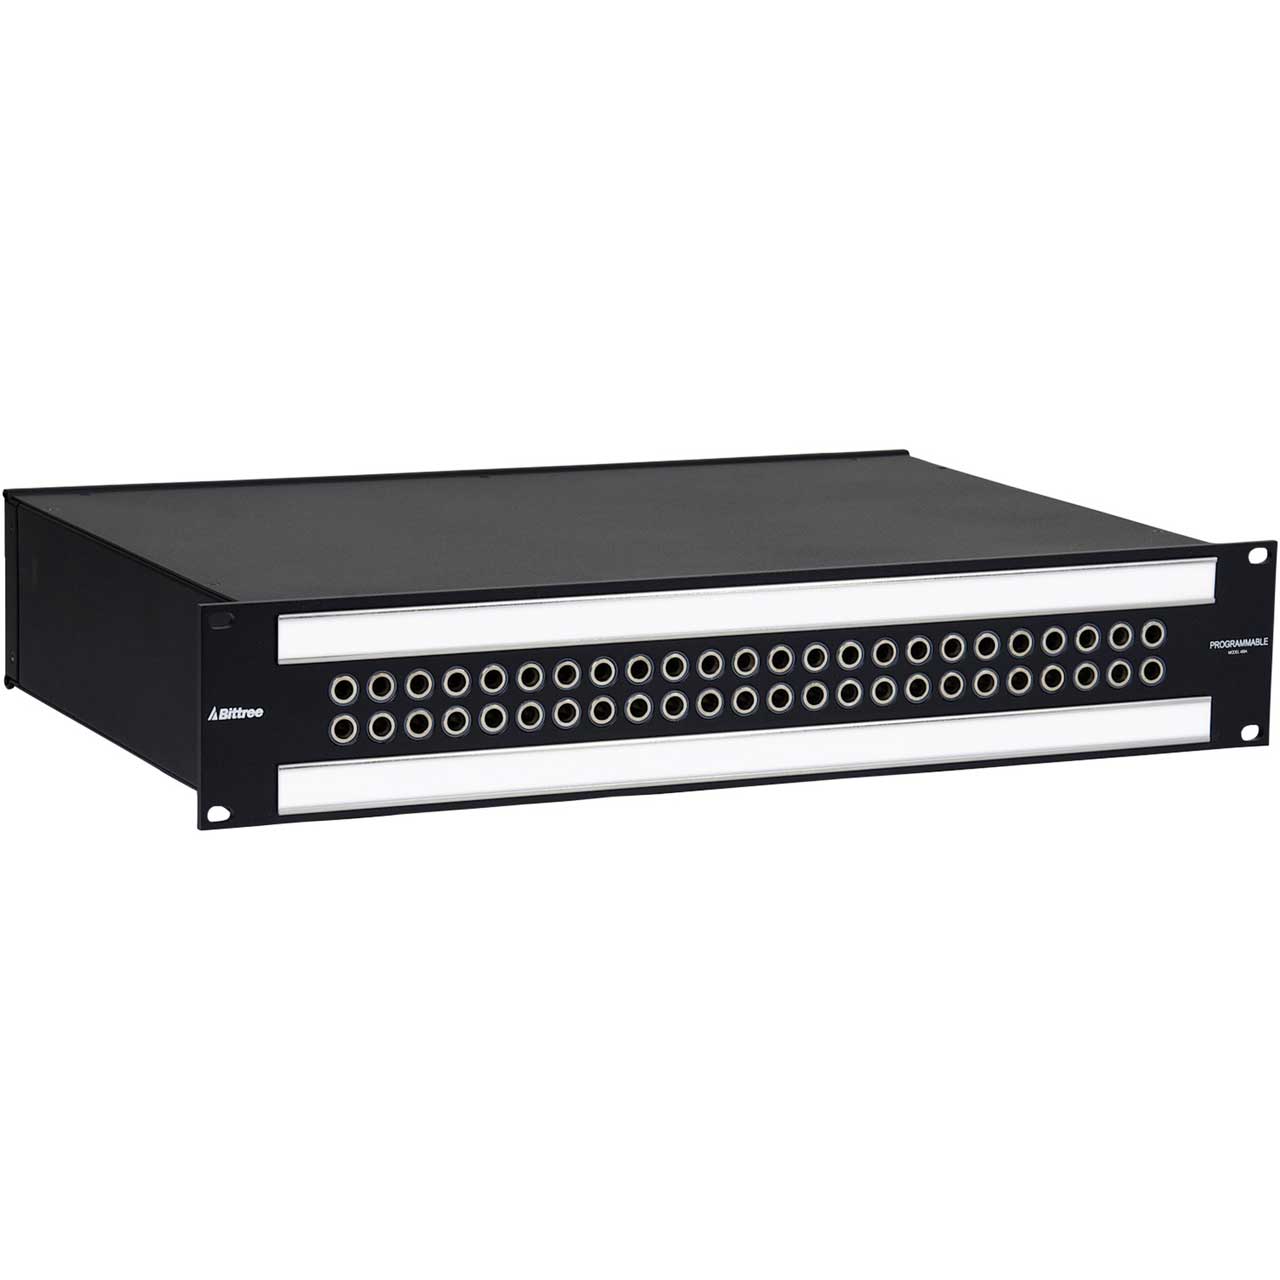 Bittree B48DC-NNPIT/E3 M2OU12L 2 RU Black 2x24 Mono Spaced Patch Panel with 2 Designation Strips - 12 Inch Chassis